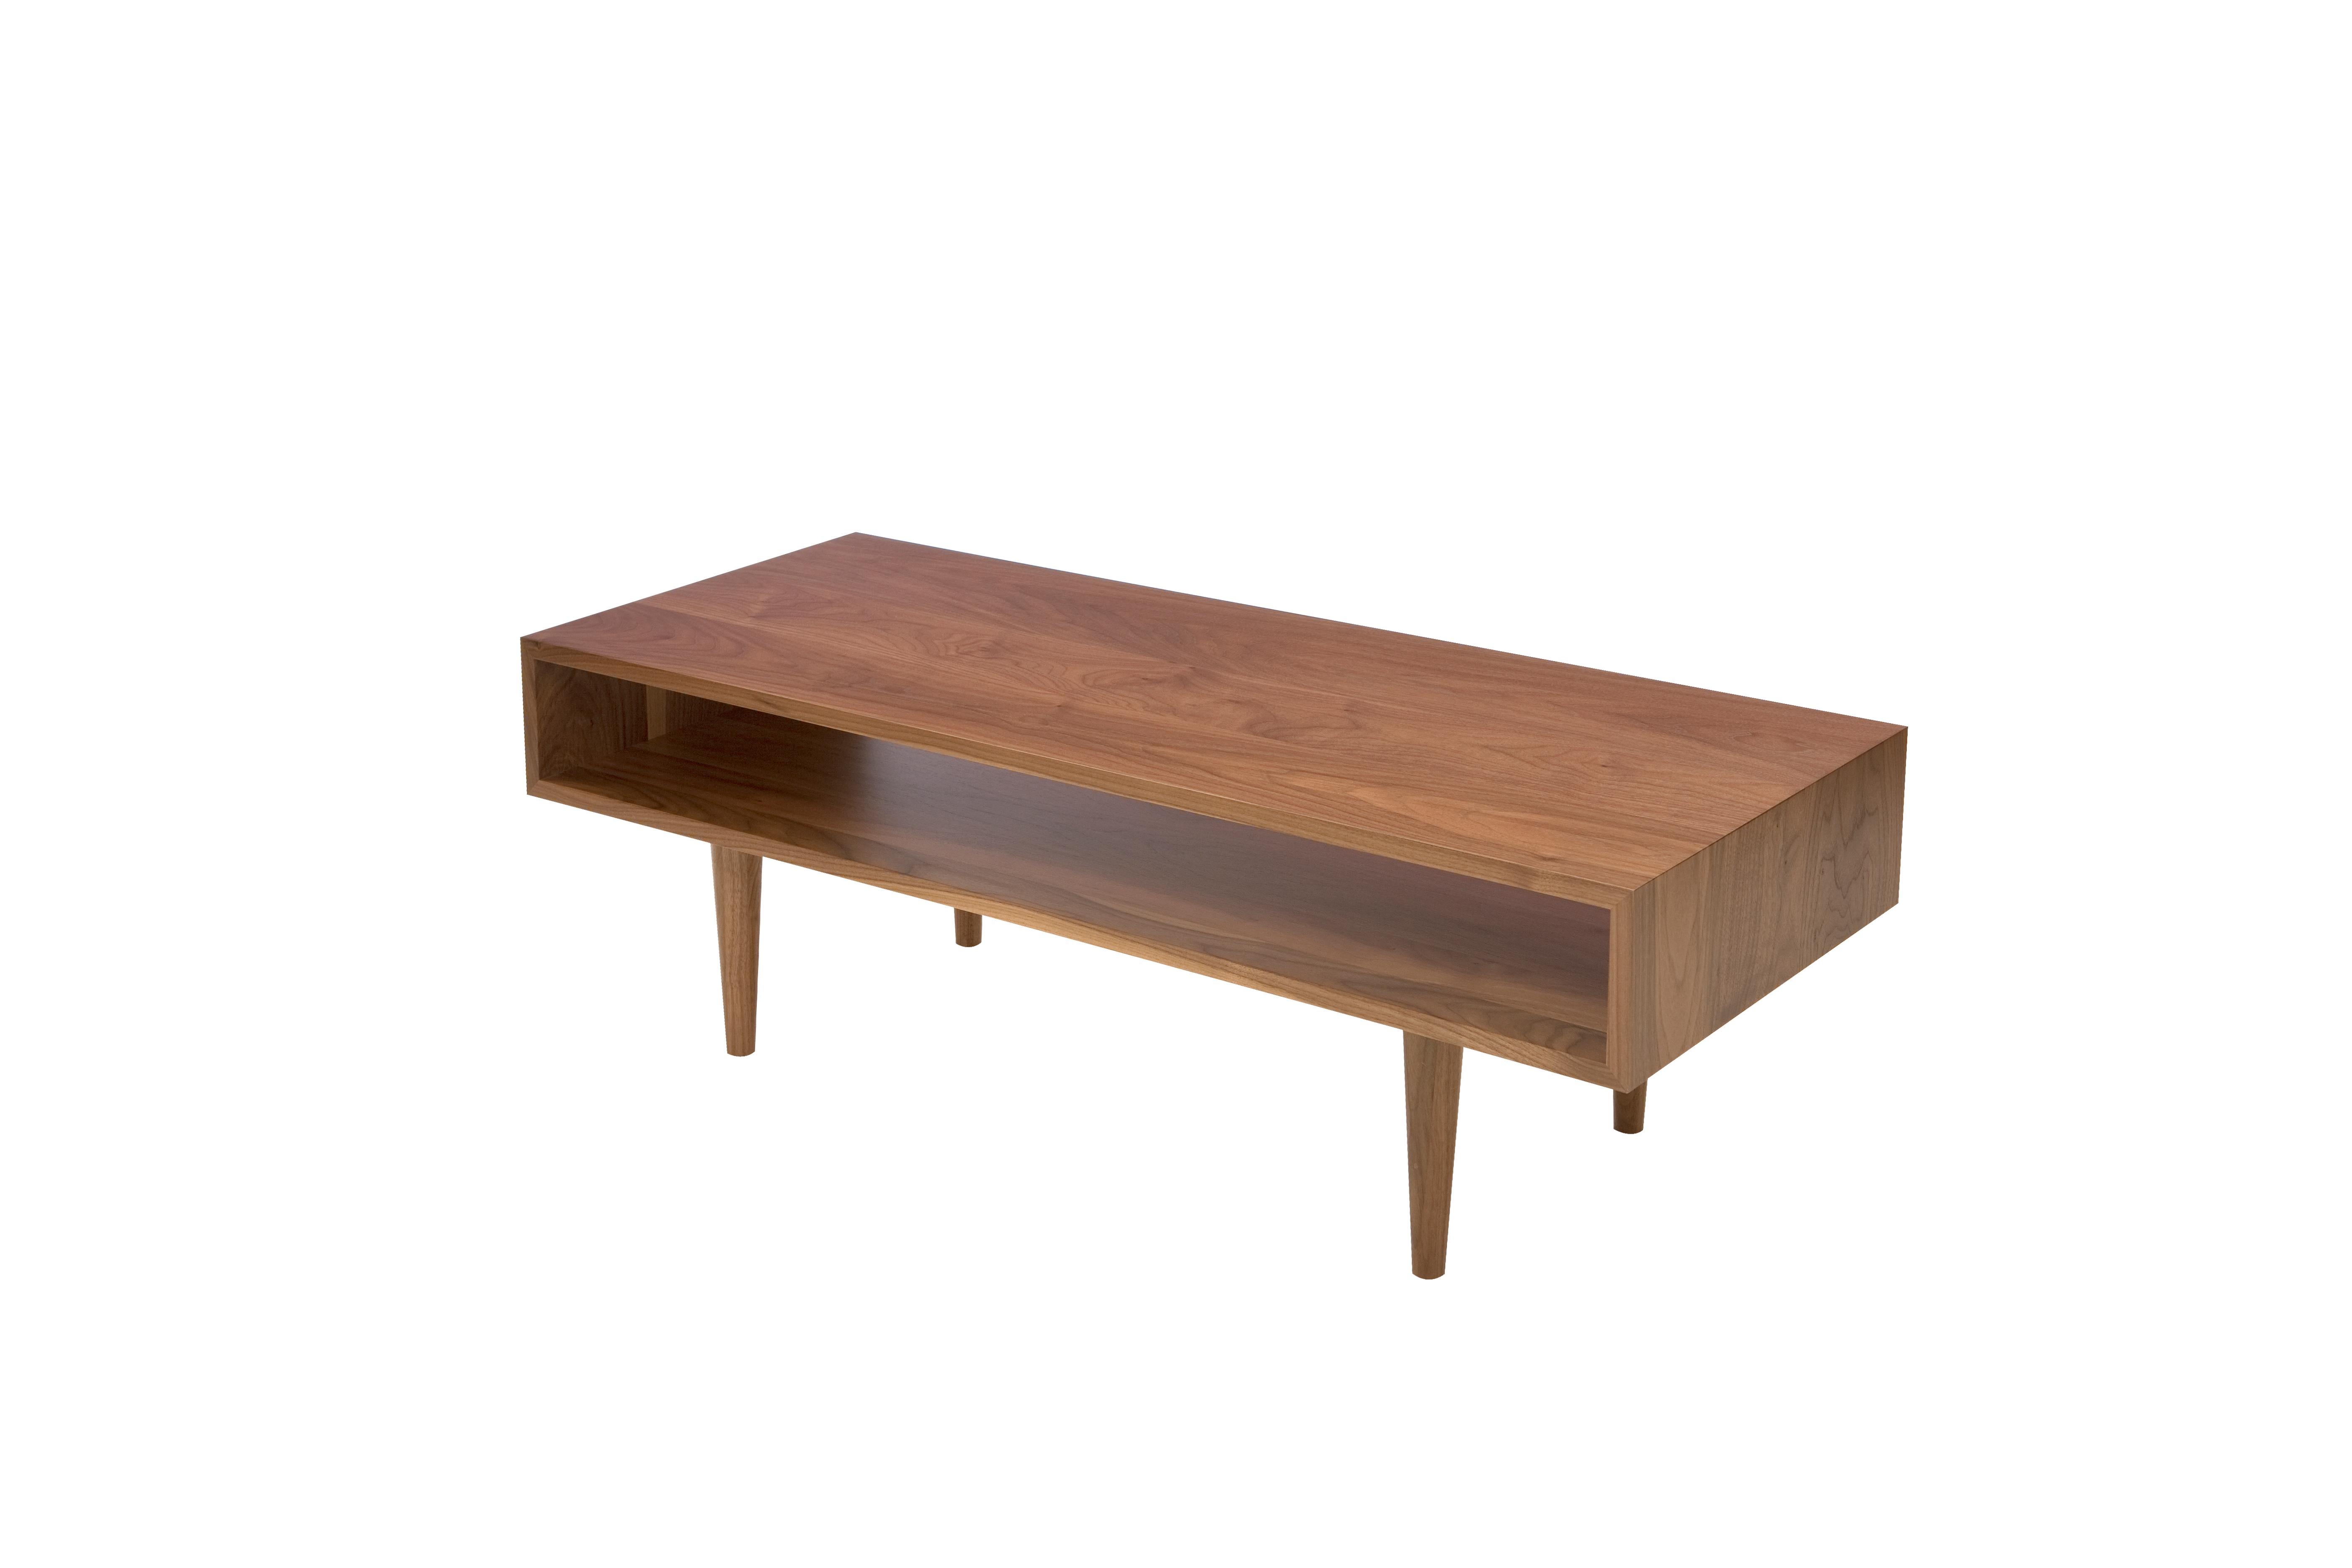 Sleek, modern and classic. A natural juxtaposition. Heavily influenced by mid-century design, this timeless piece complements both contemporary and more traditional interiors. Reinforced mitered joints allow the wood grain to wrap around the piece